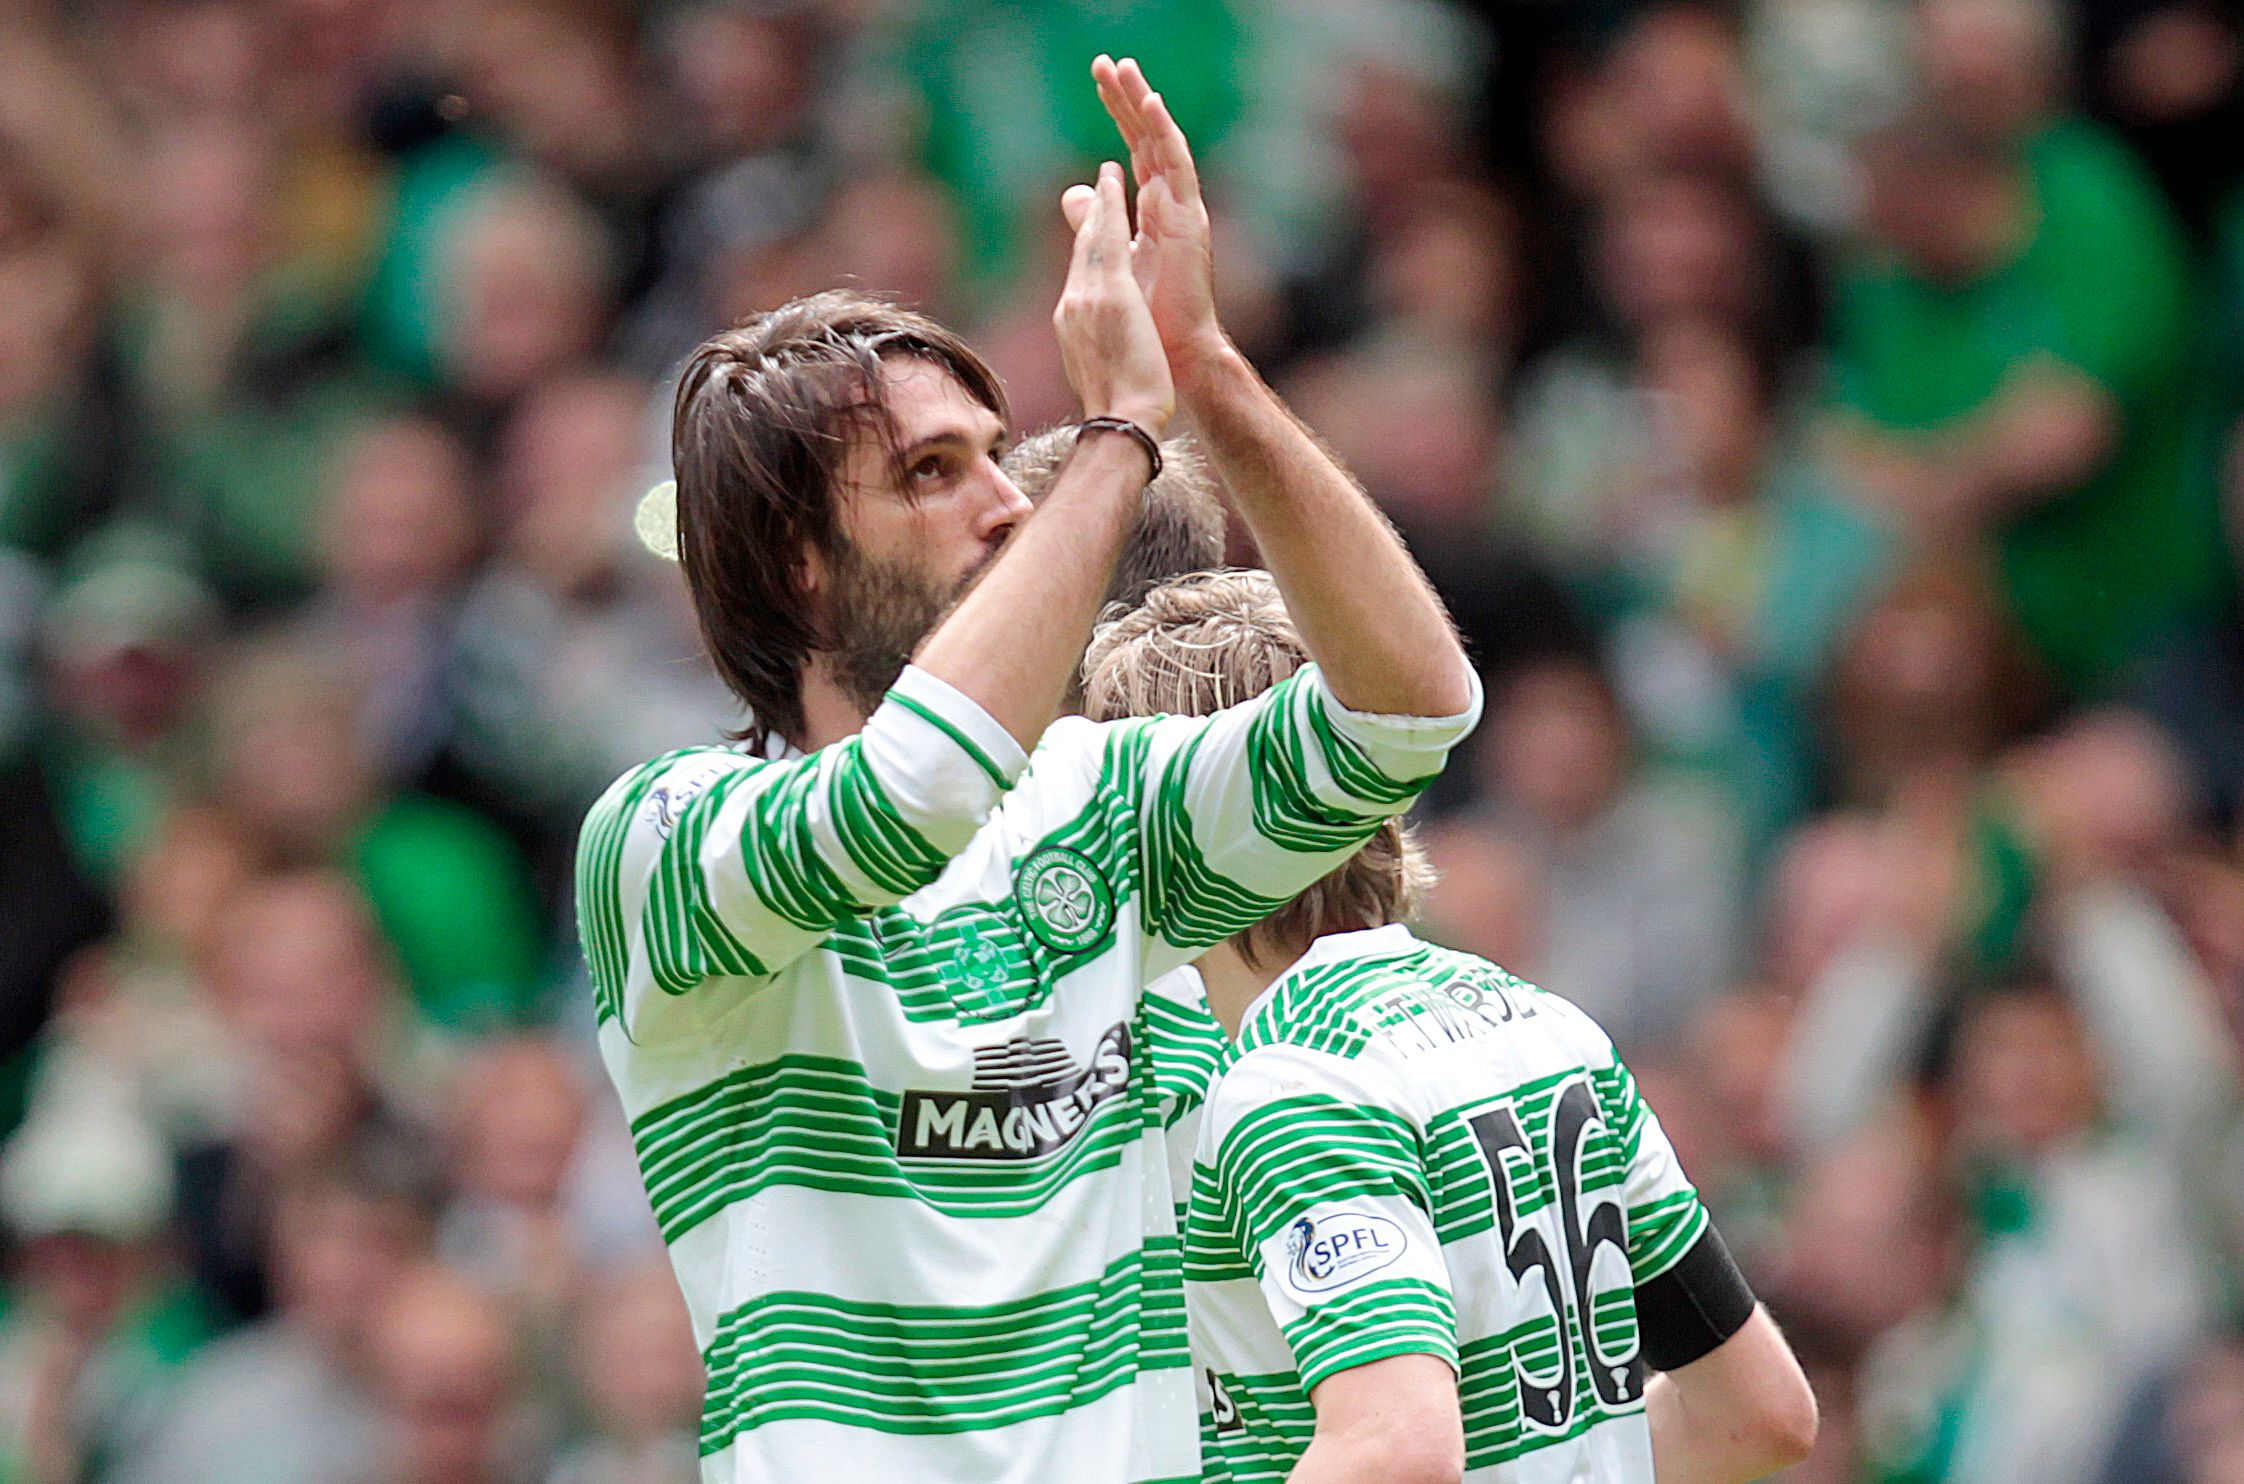 Football - Celtic v Dundee United - Scottish Premiership - Celtic Park - 11/5/14 
Celtic's Georgios Samaras celebrates scoring their second goal  
Mandatory Credit: Action Images / Graham Stuart 
Livepic 
EDITORIAL USE ONLY. No use with unauthorized audio, video, data, fixture lists, club/league logos or 